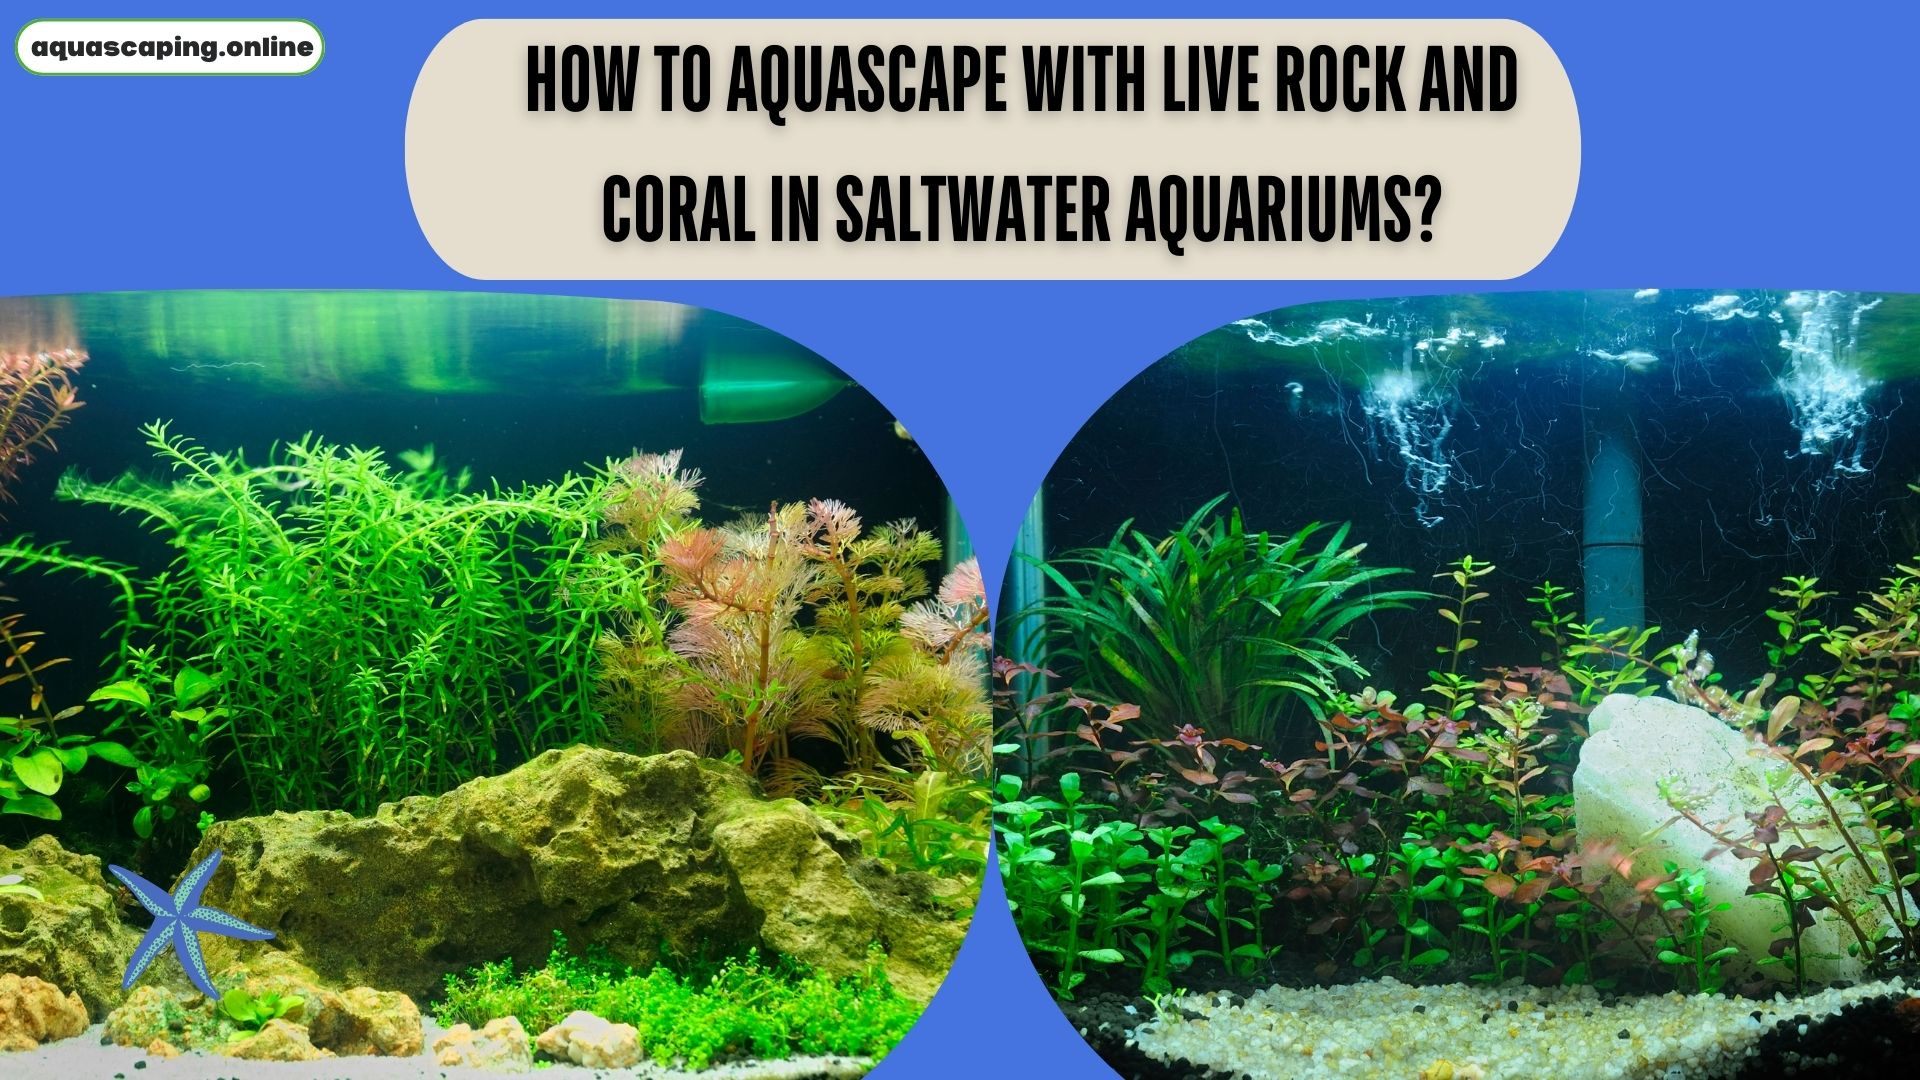 Aquascape with live rock and coral in saltwater aquariums